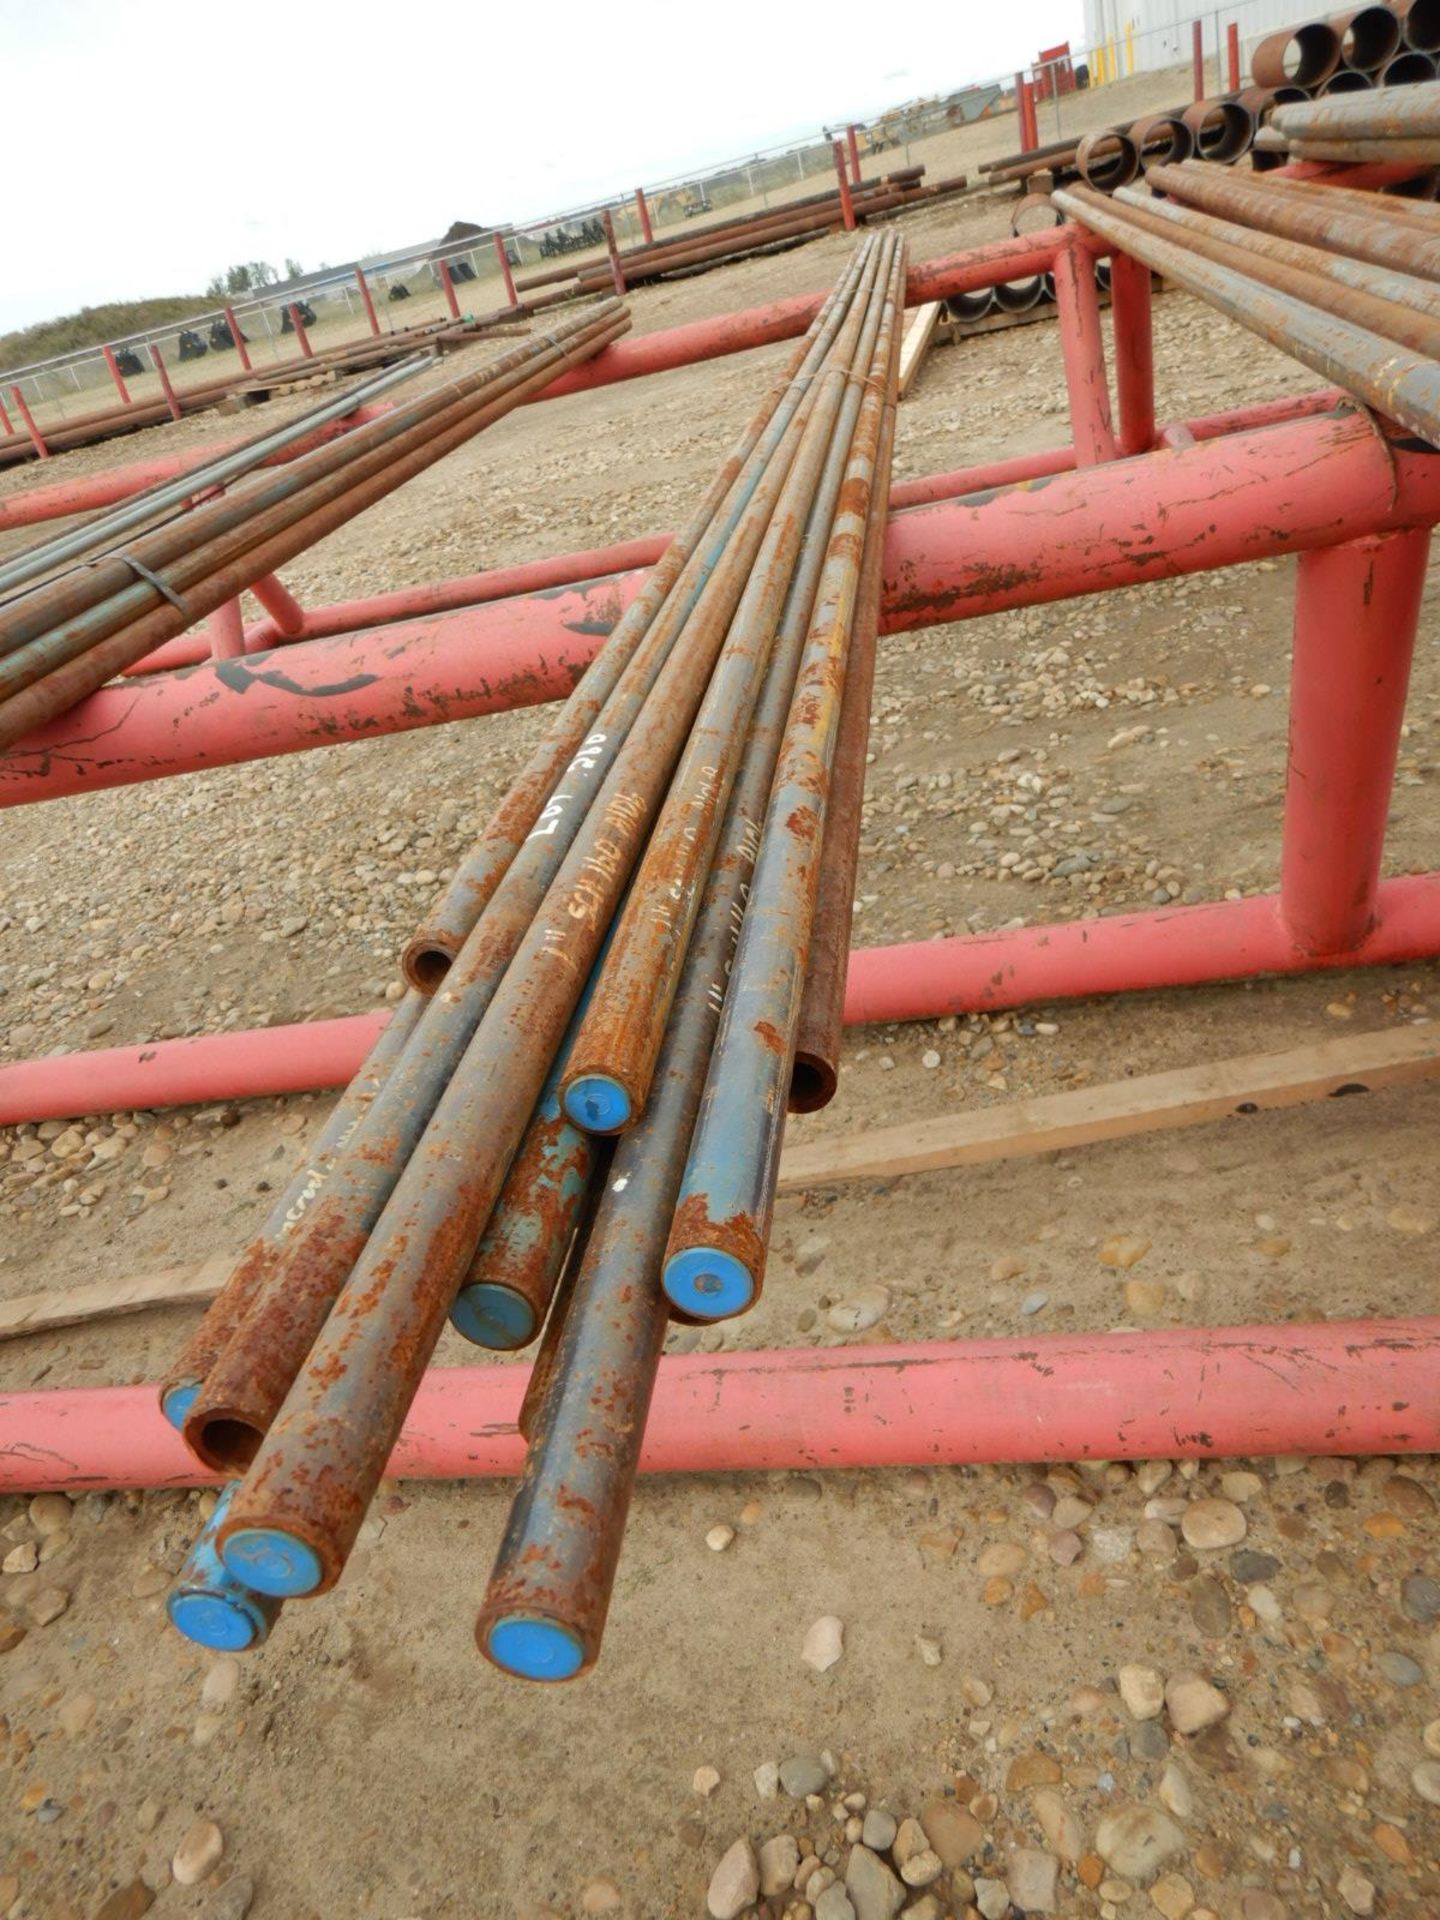 16 JOINTS 1 "X 20' X SCH 40 - SCH160 A106 SURPLUS. PIPE LOCATED @ THE PIPE YARD - ASPELUND IND.